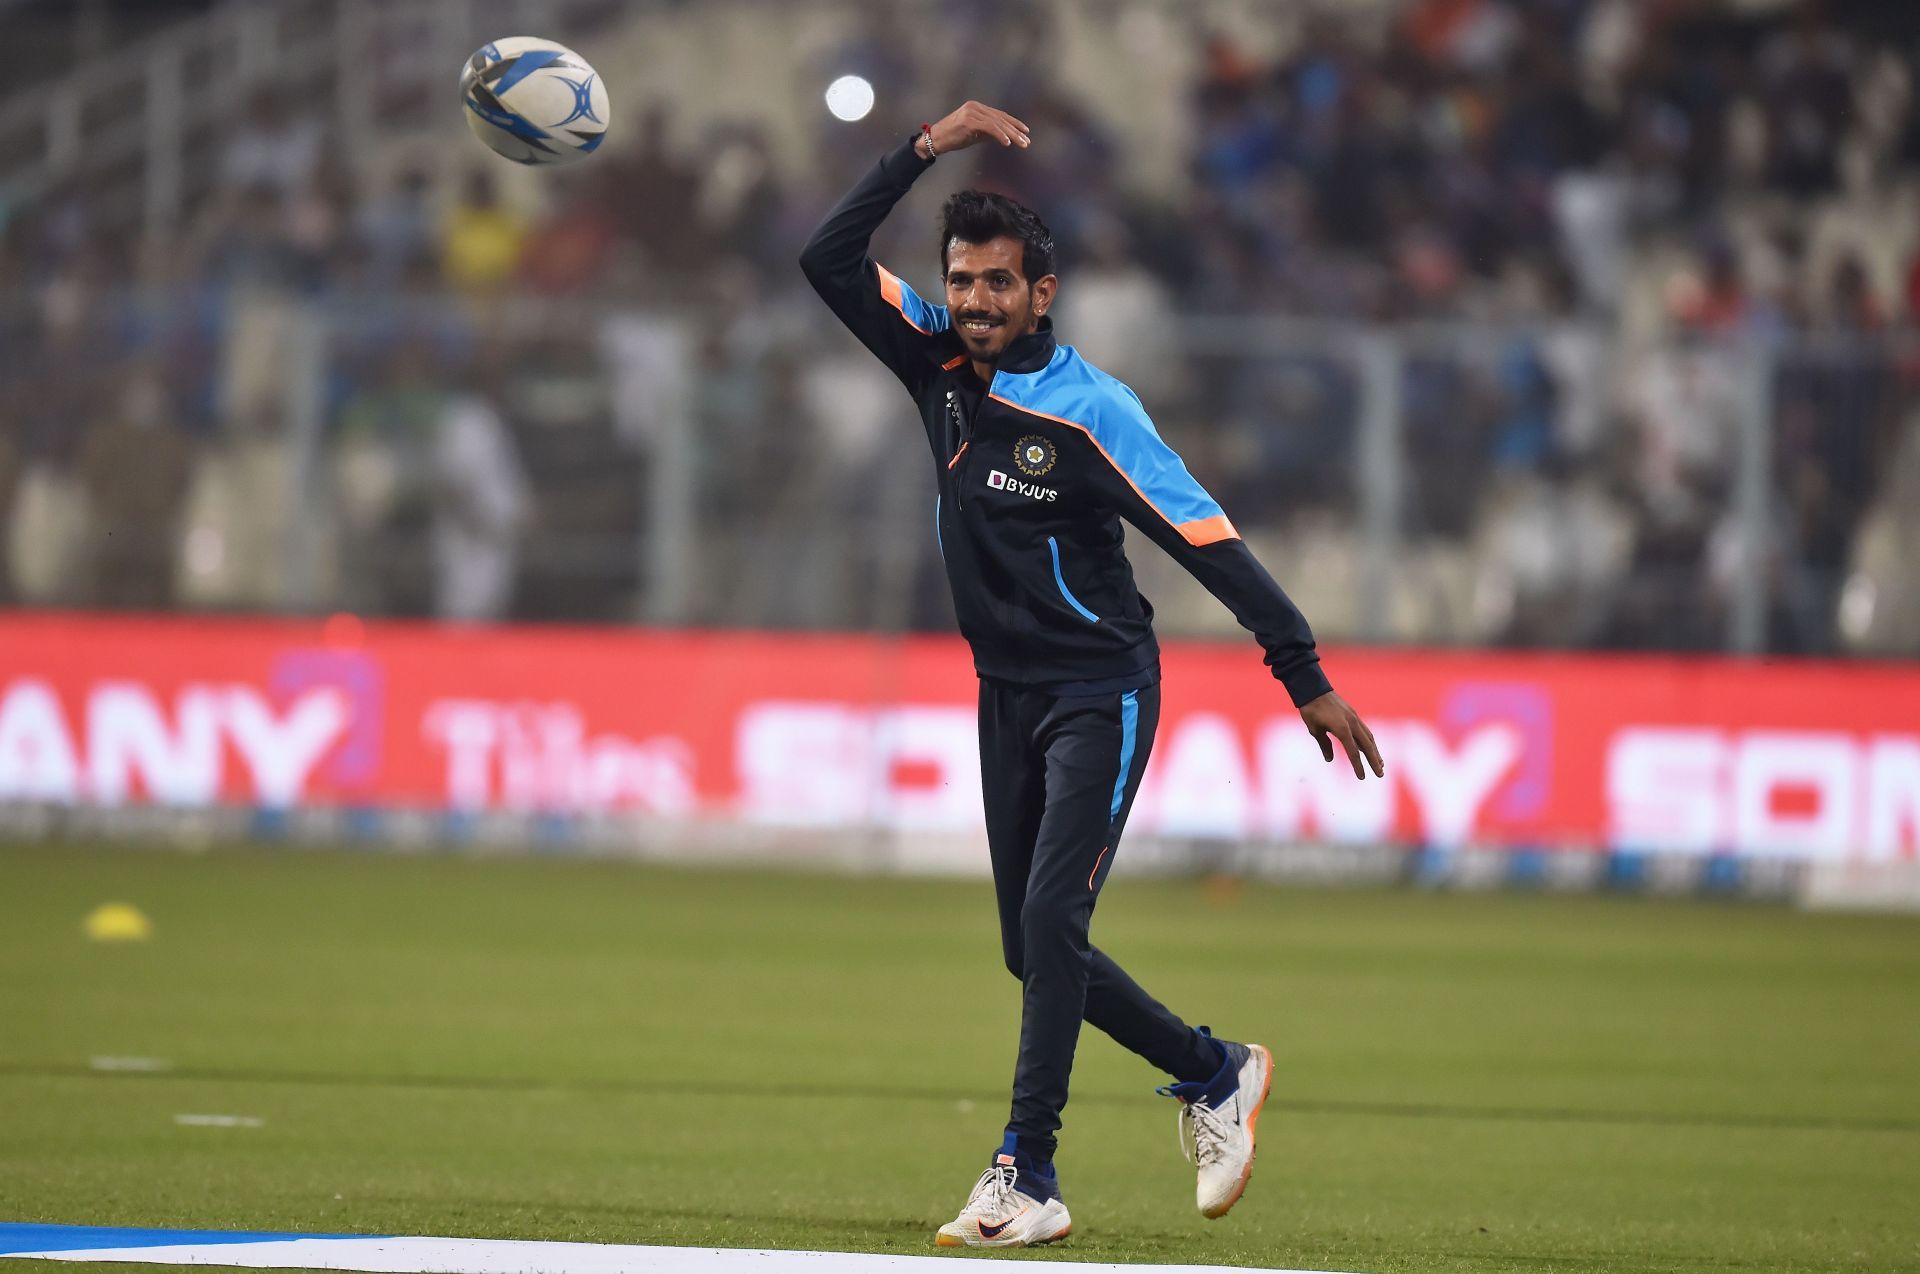 Chahal is one of the match-winners in the IPL